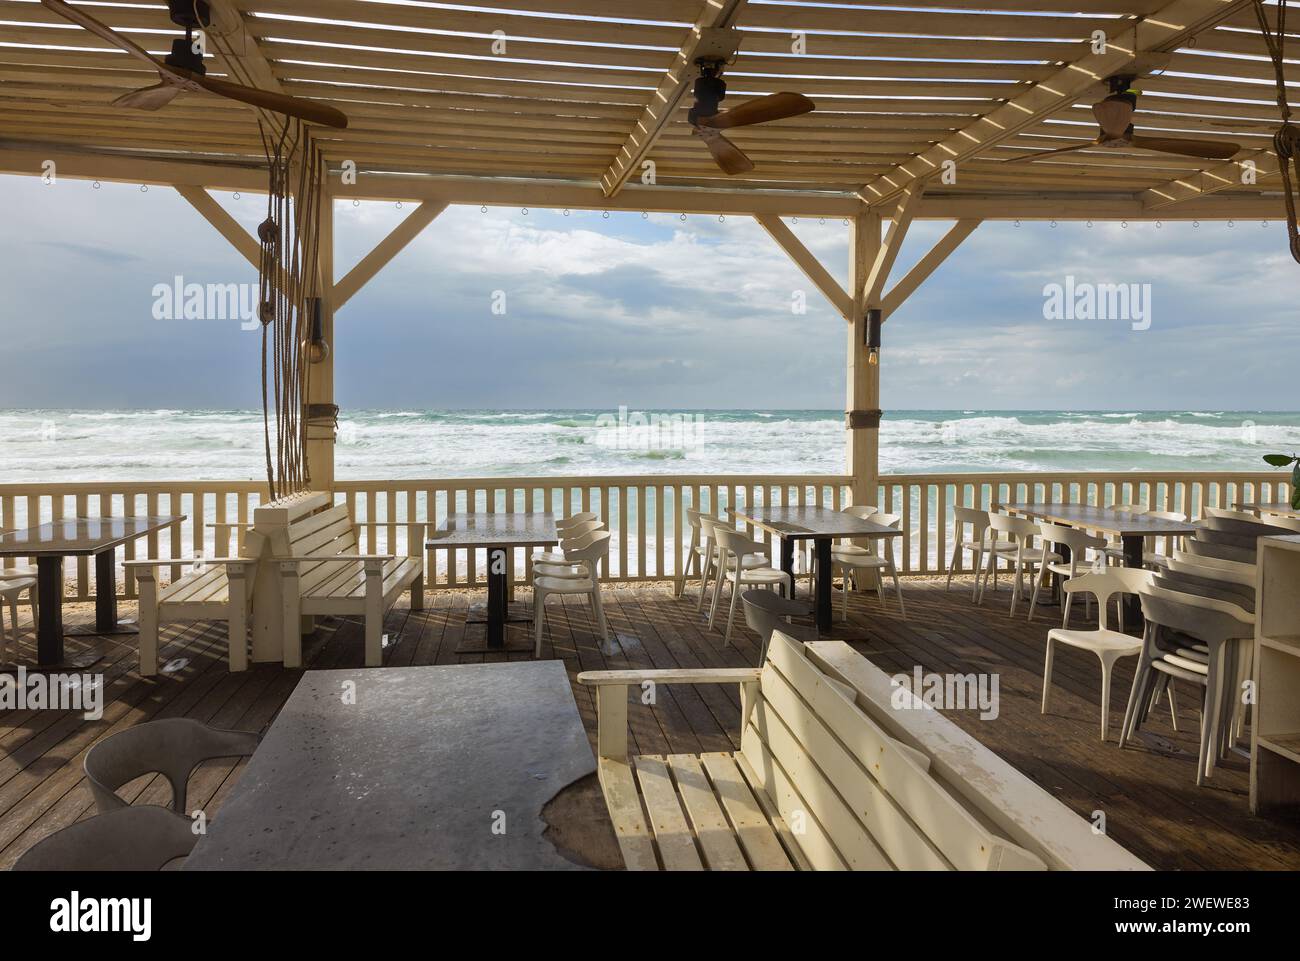 wooden tables with benches and a canopy on the seashore in Haifa Stock Photo